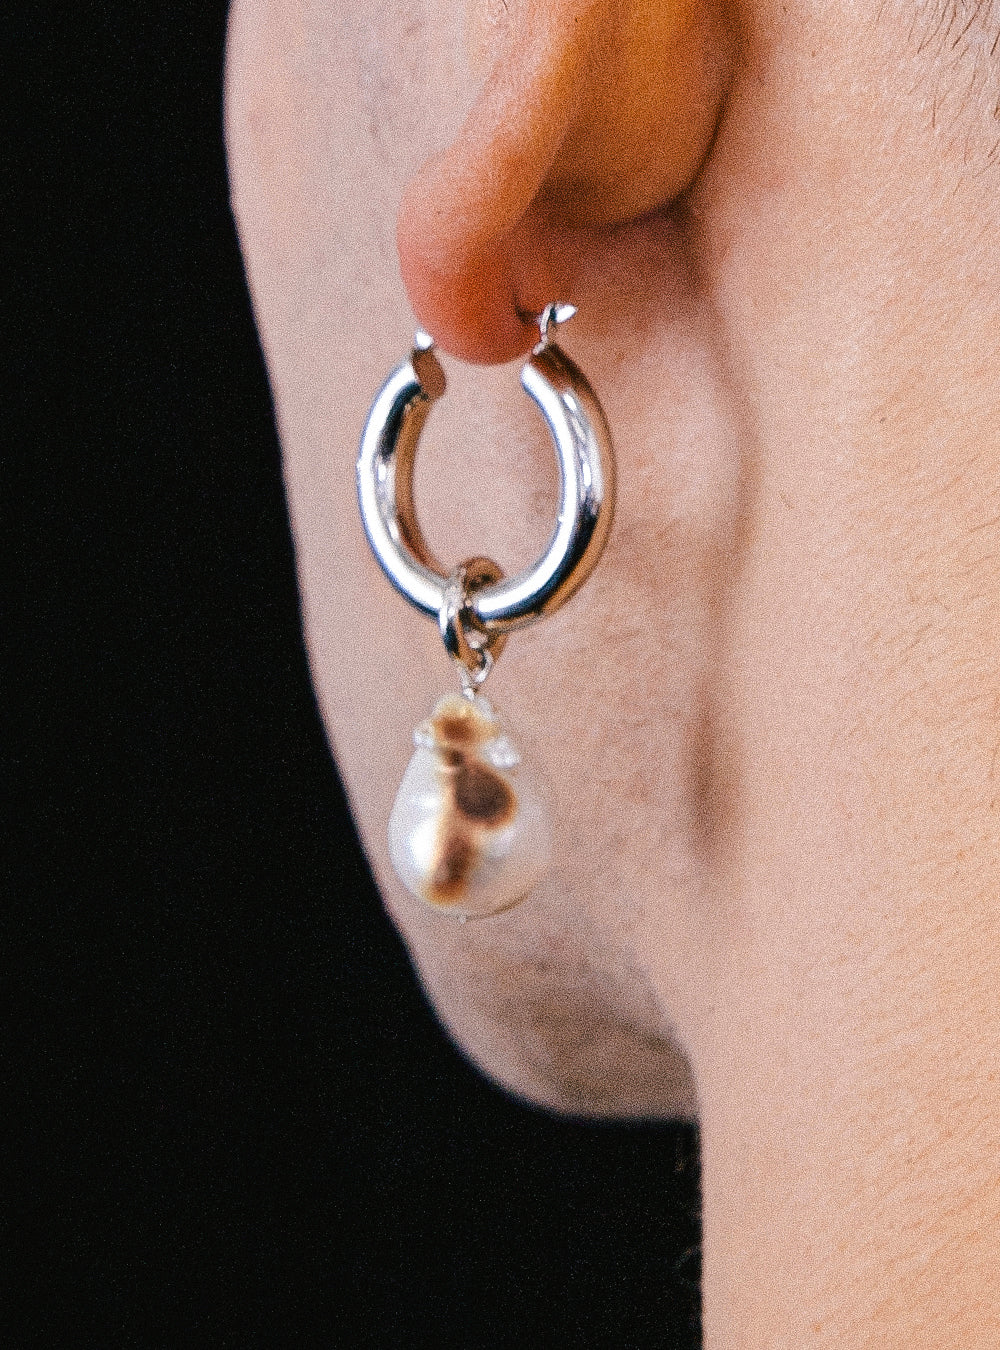 a man's ear with a MIDNIGHTFACTORY Burnt baroque pearl earring.